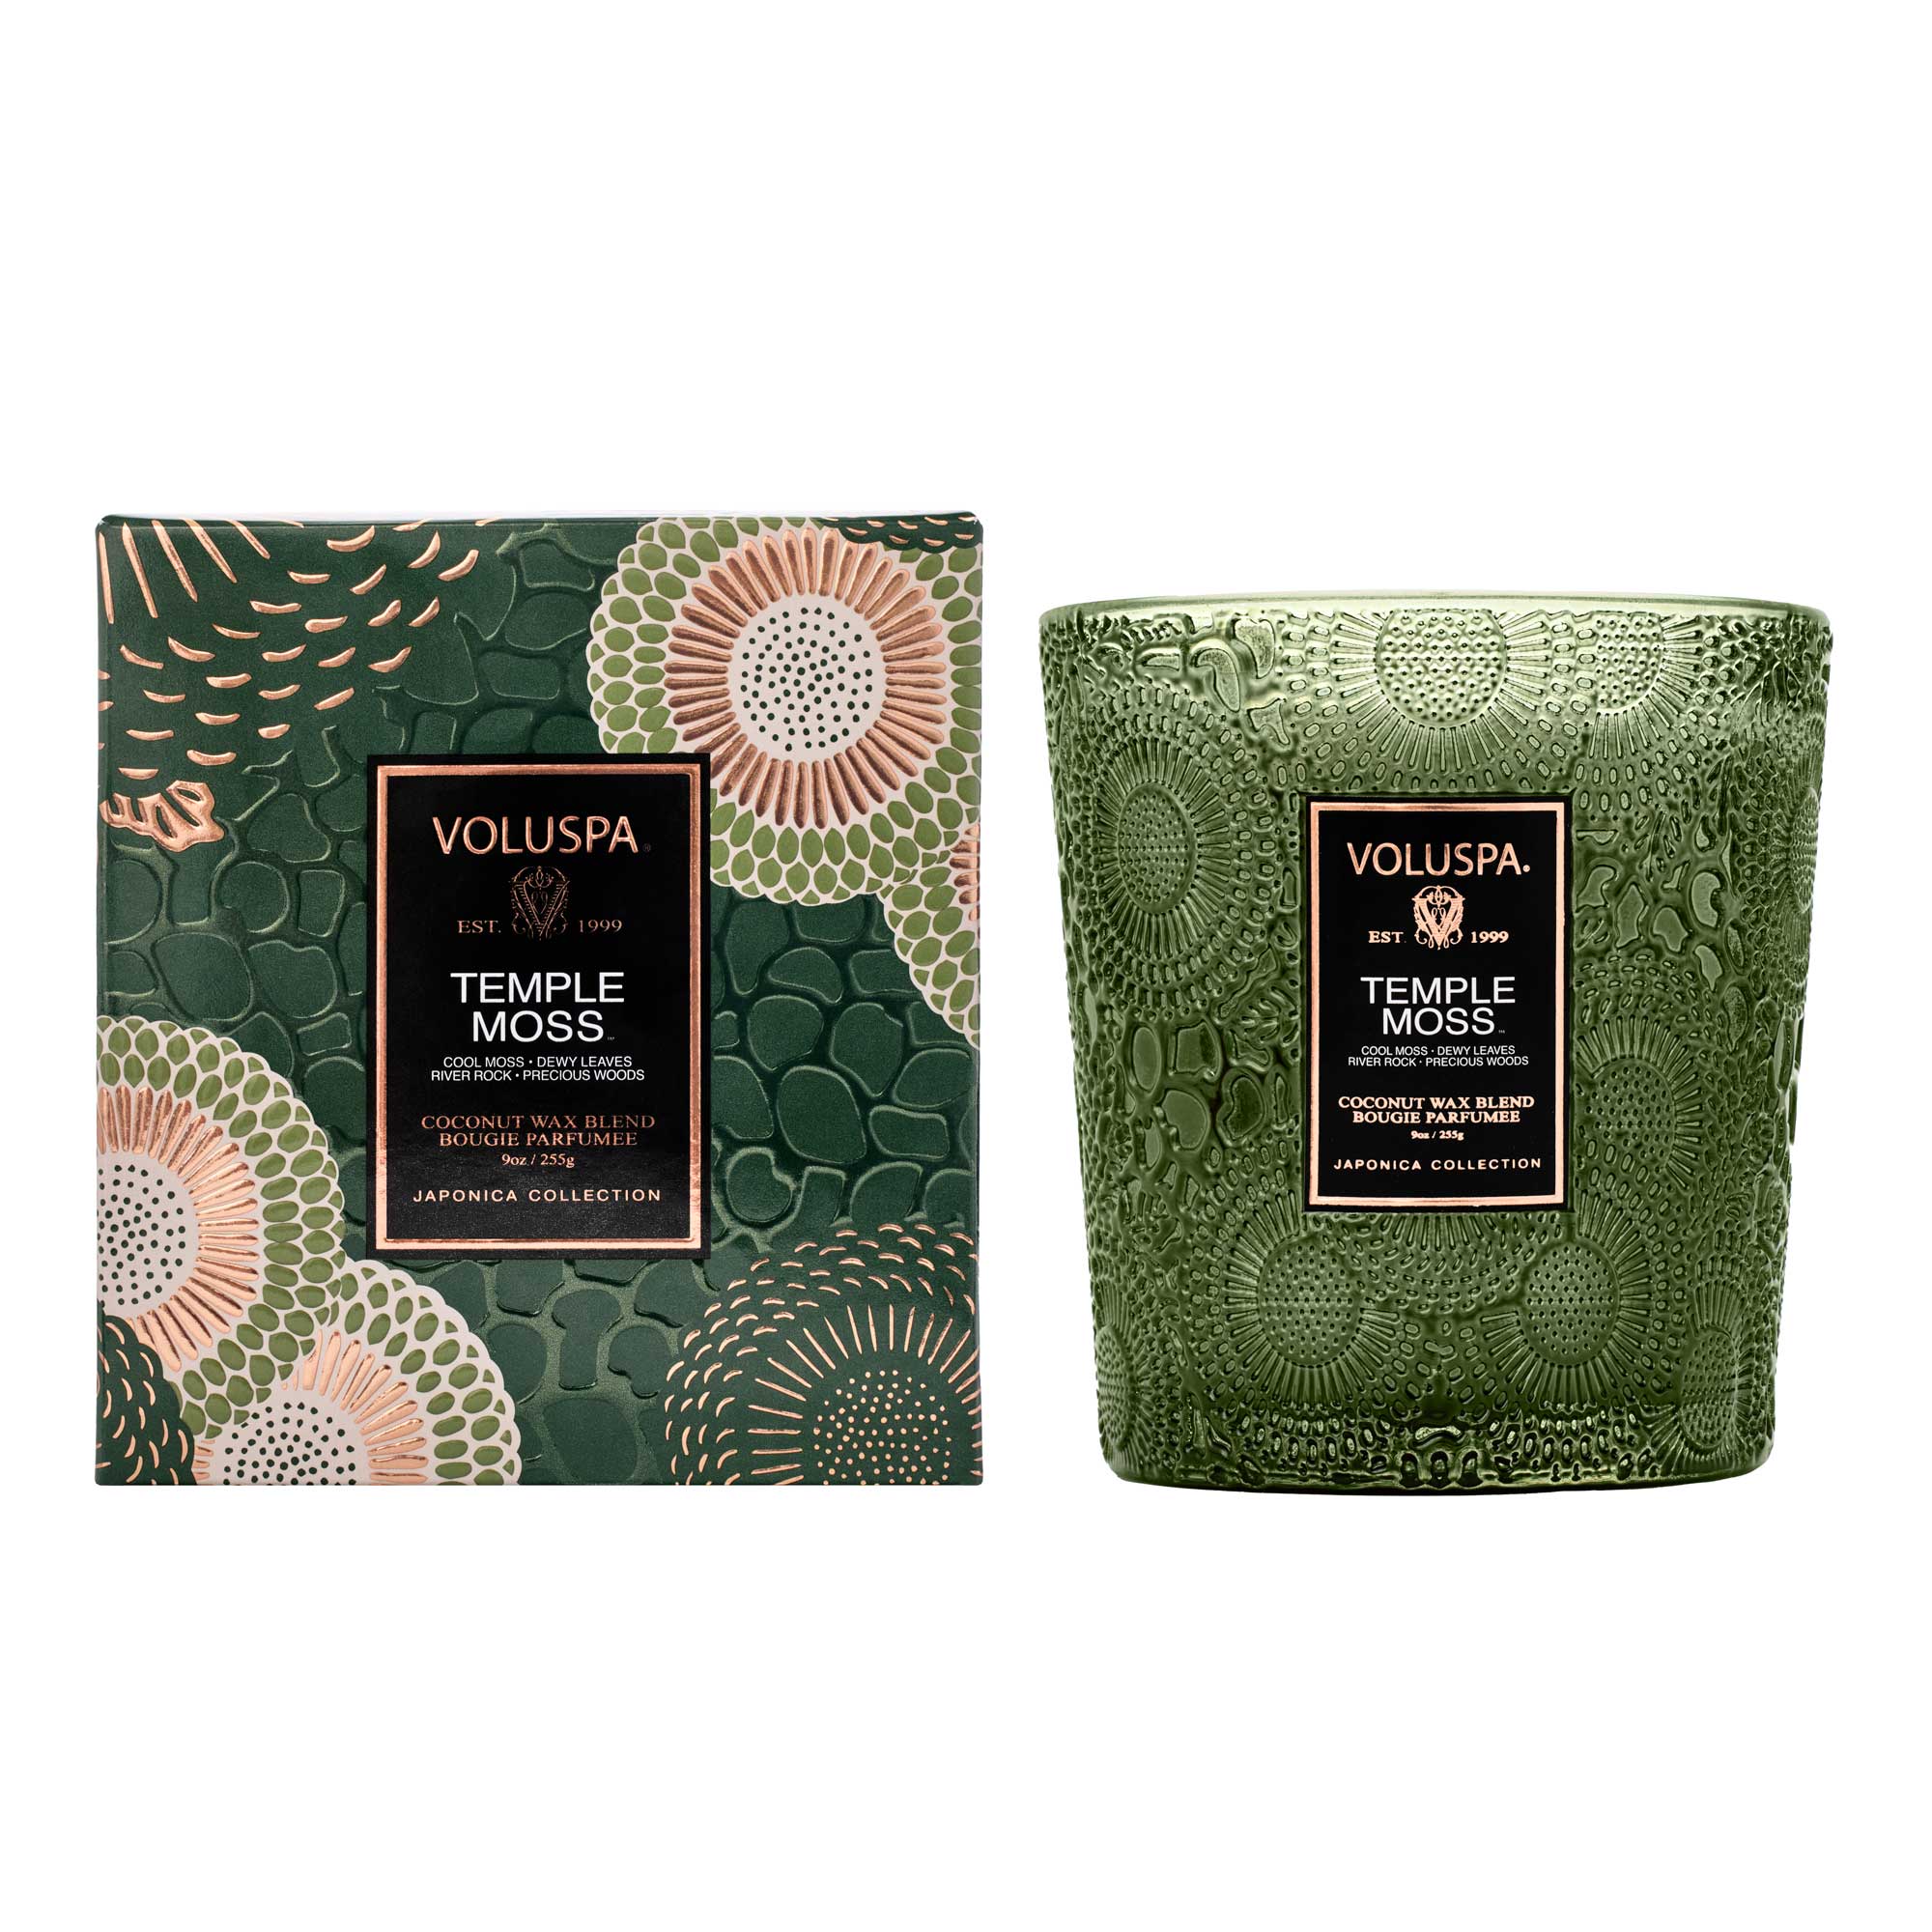 Voluspa Japonica Collection Boxed Classic Candle 9 oz. / Temple Moss